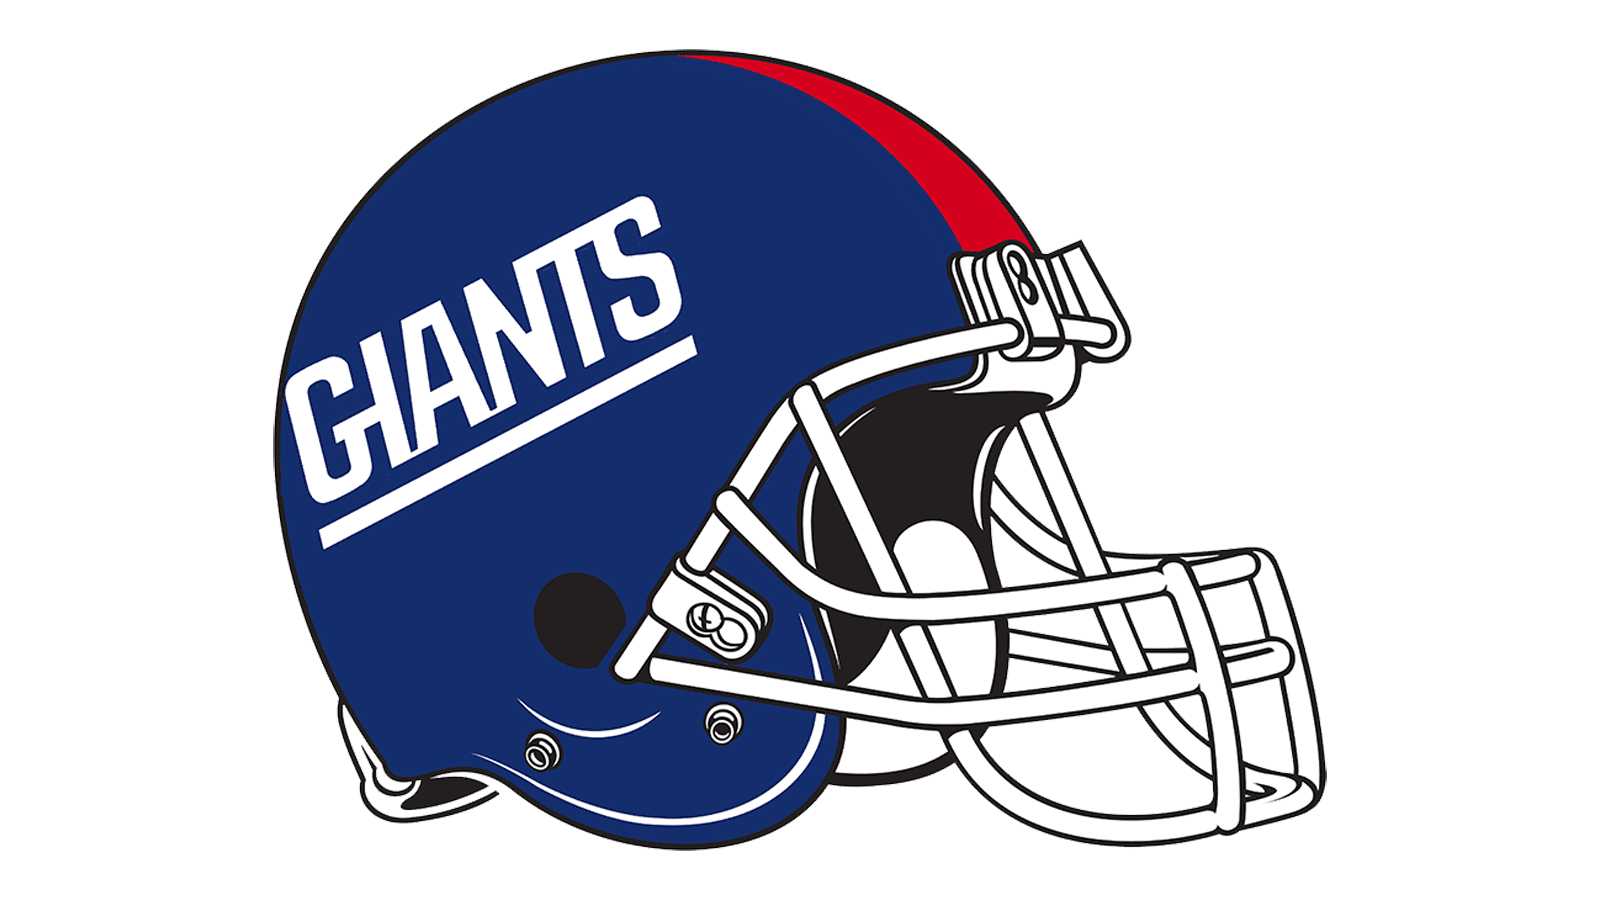 New York Giants Logo and sign, new logo meaning and history, PNG, SVG